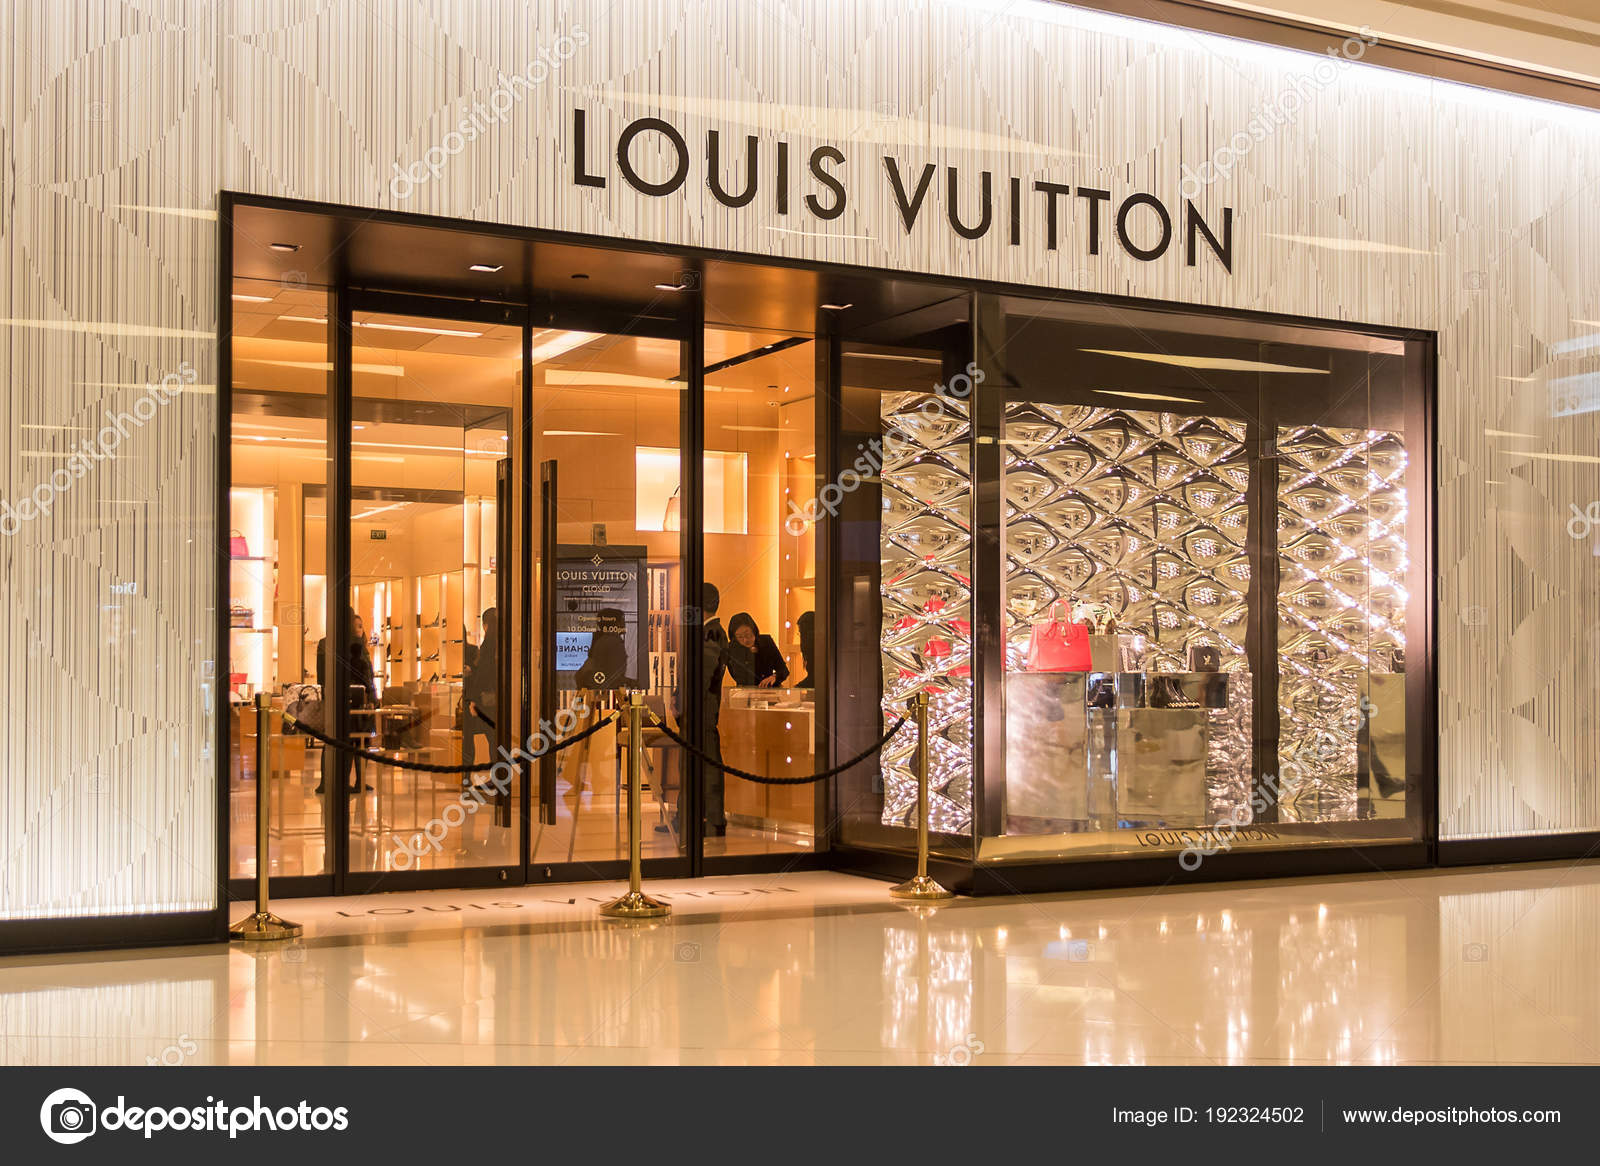 How to get to Louis Vuitton Bangkok Emporium in พระโขนง by Bus or